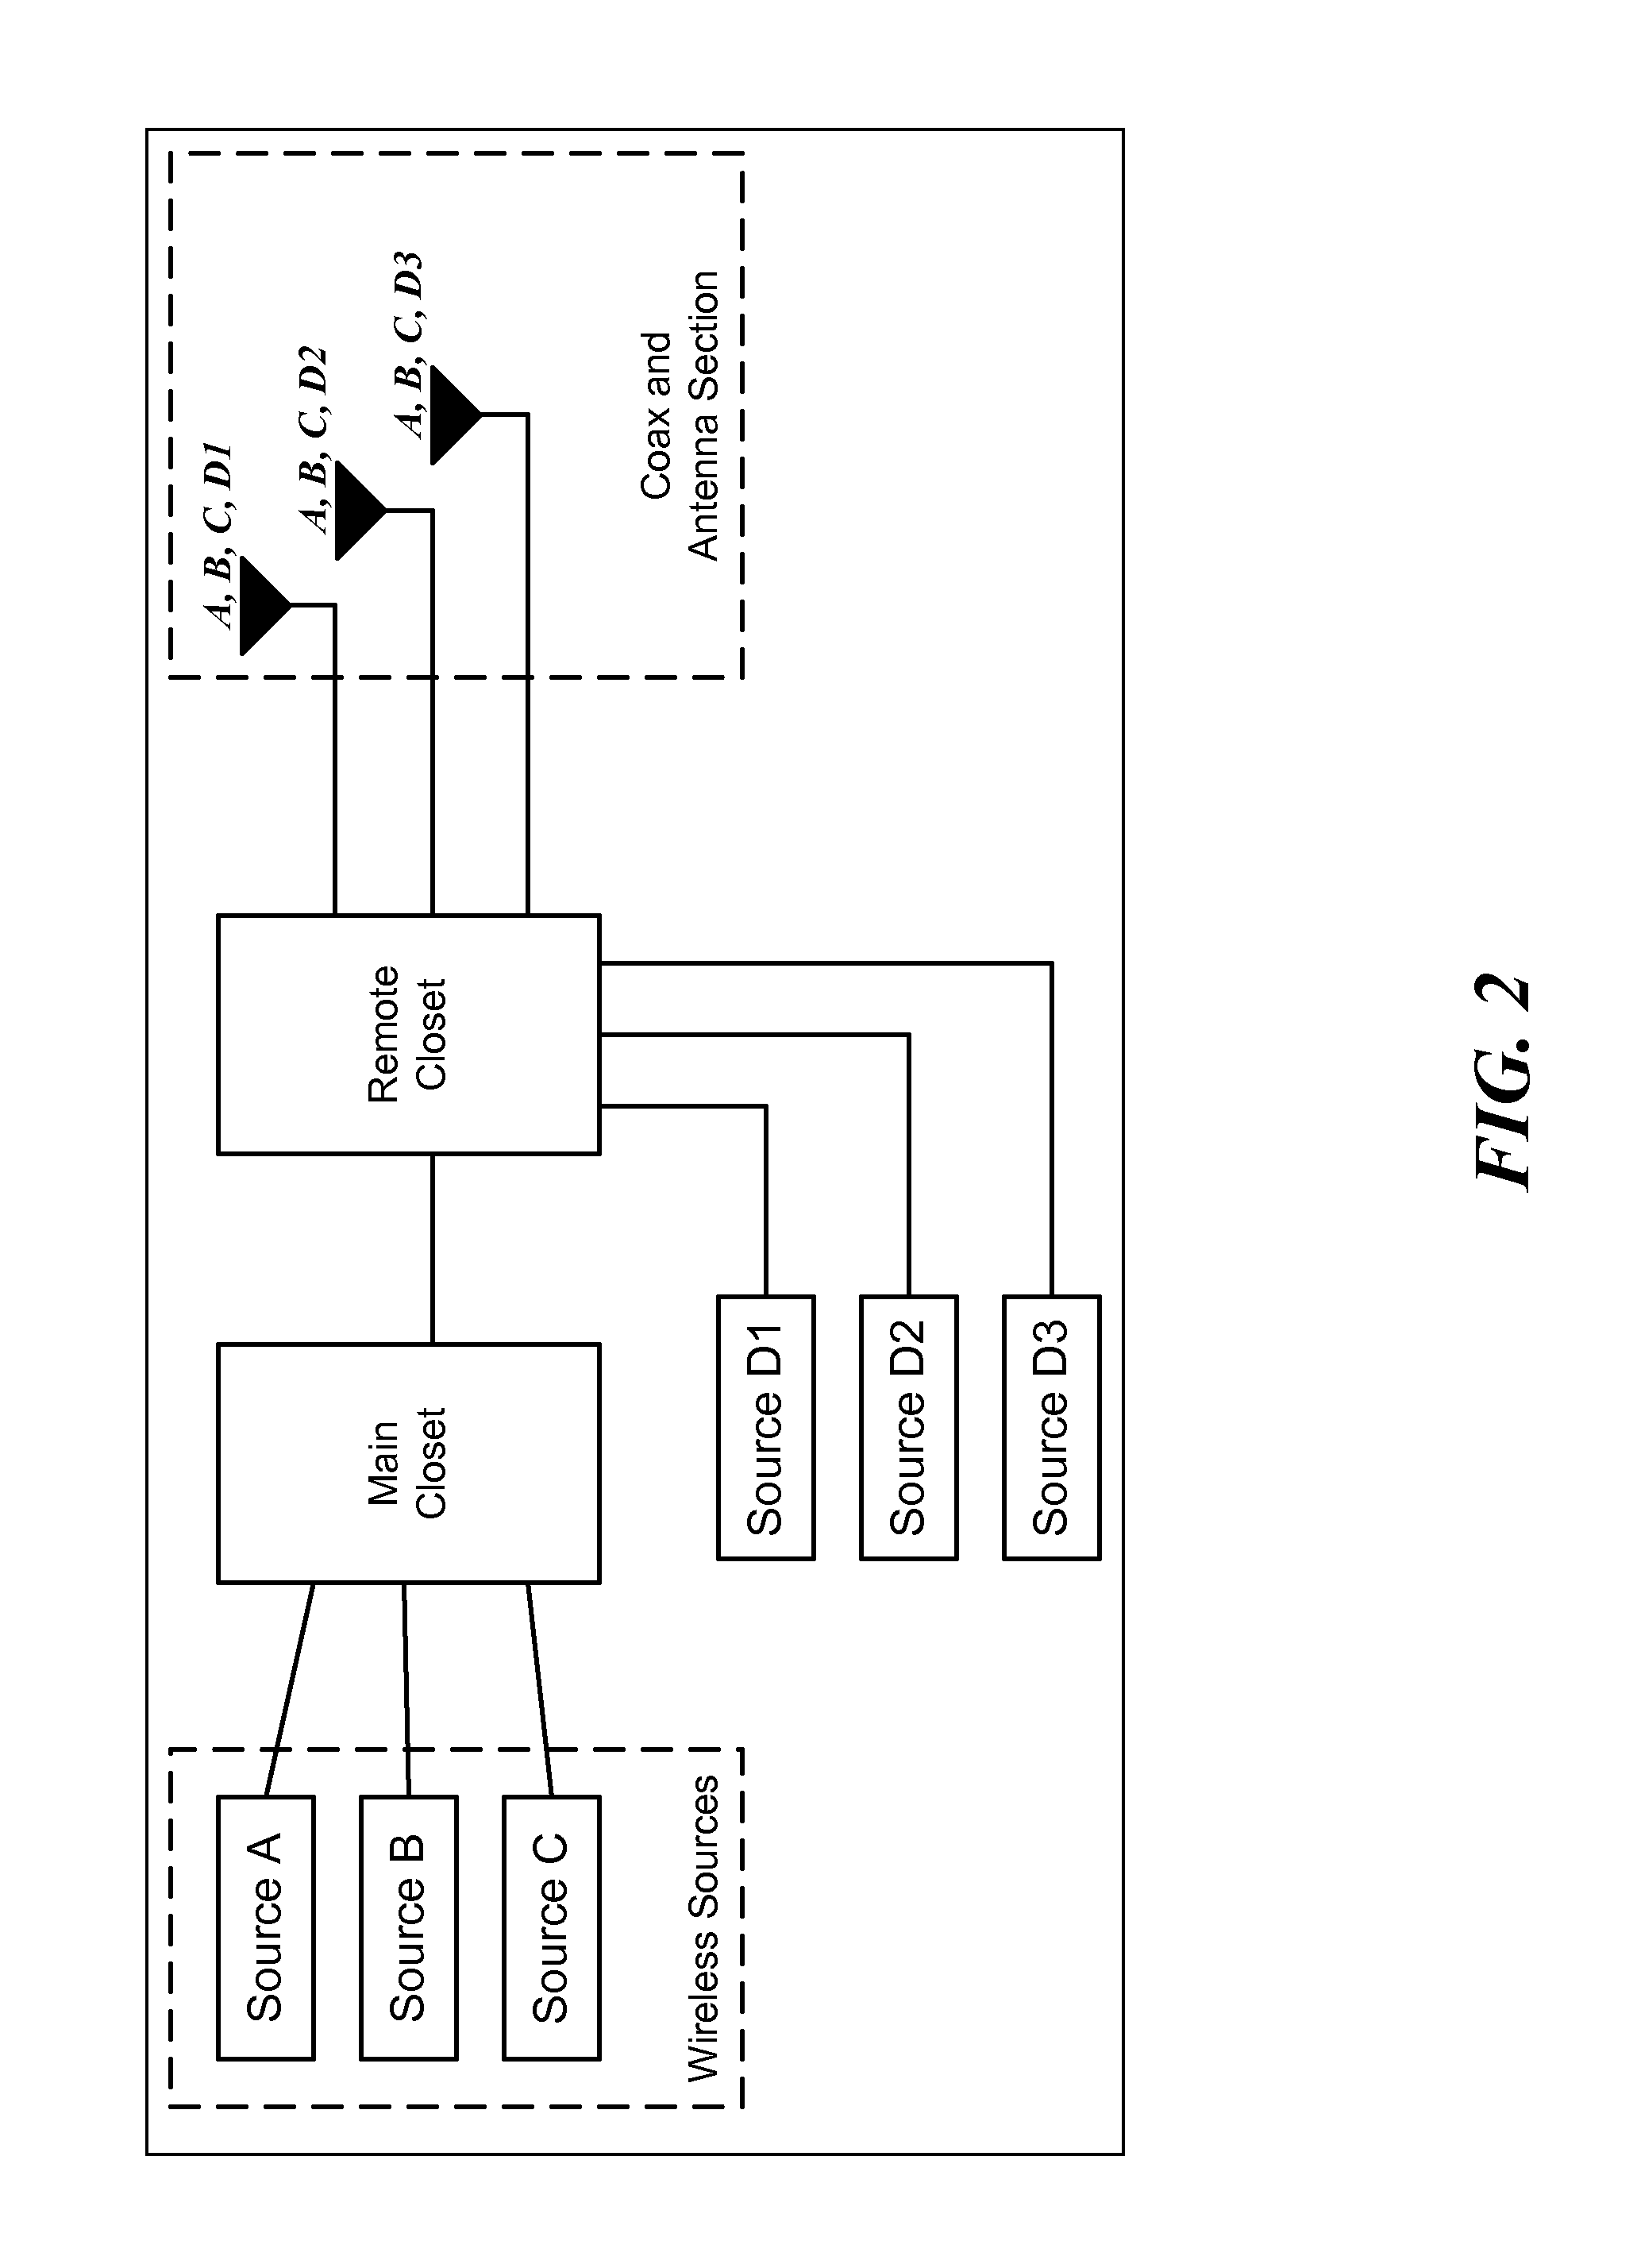 Hybrid Passive Active Broadband Antenna for a Distributed Antenna System